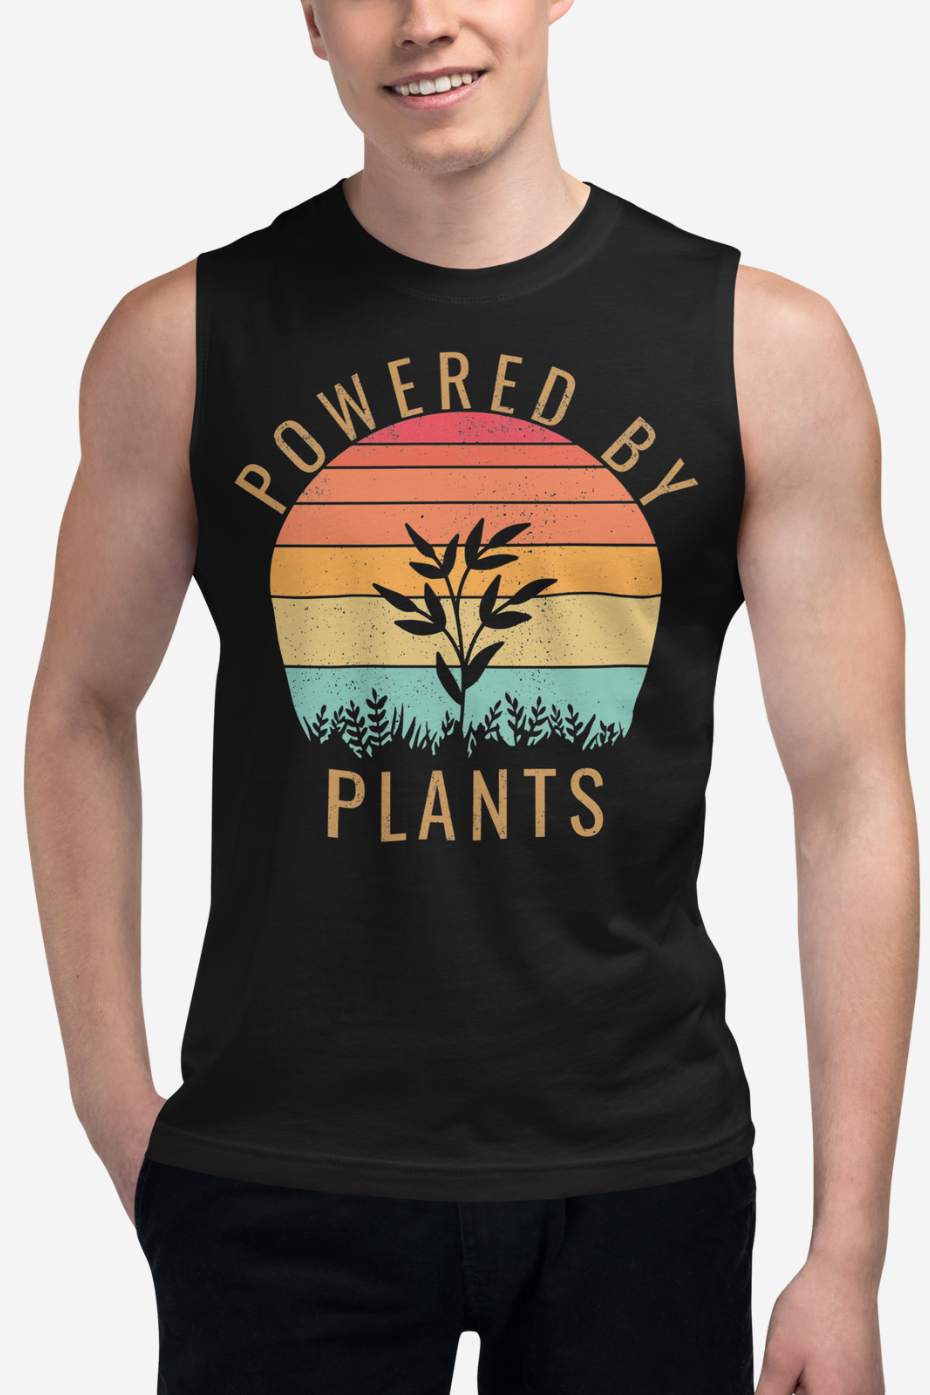 Powered by Plants Muscle Shirt